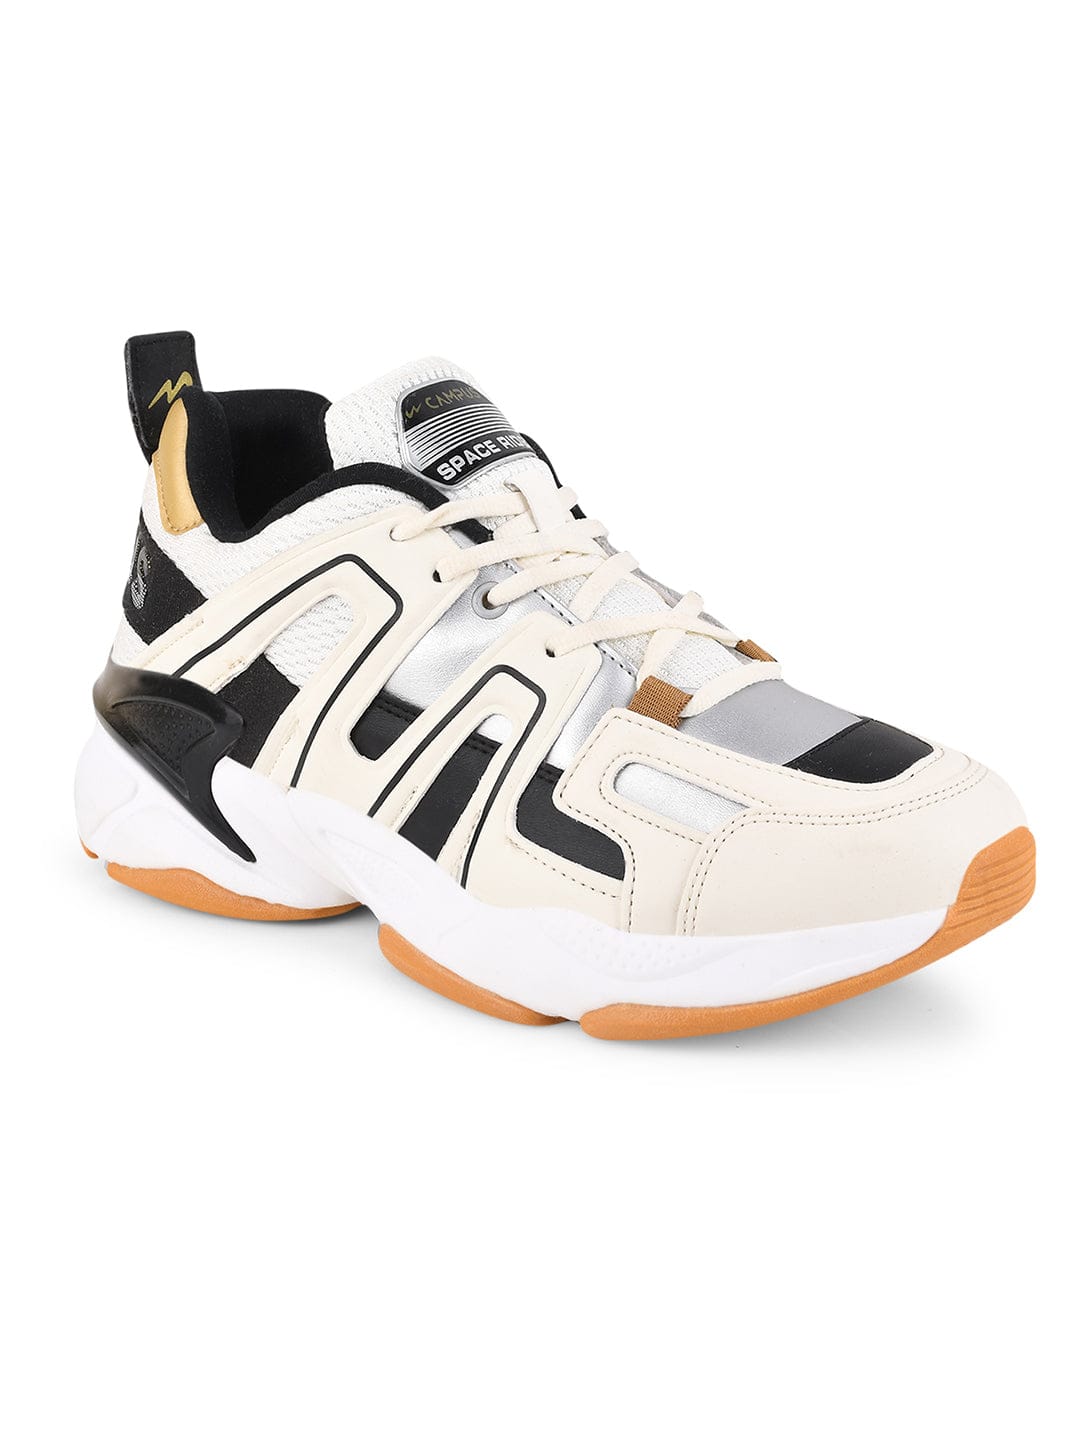 SPACE-RIDER Men's Running Shoes | Campus Shoes